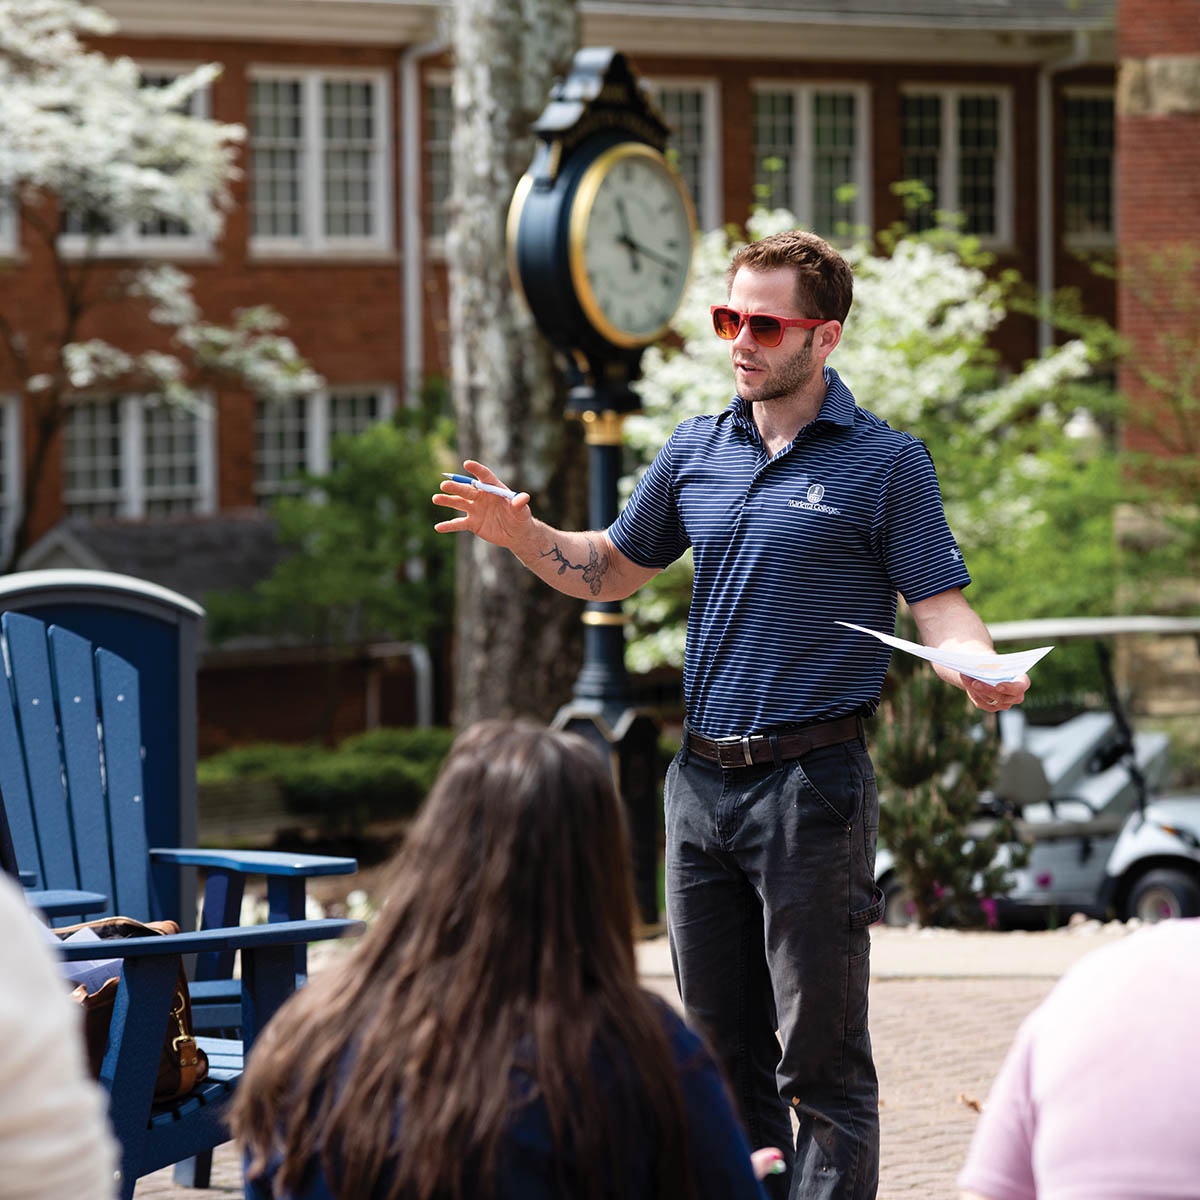 Dr. Erick Carlson, Assistant Professor of Biology, takes advantage of a warm and sunny day in Marietta by taking his class outdoors